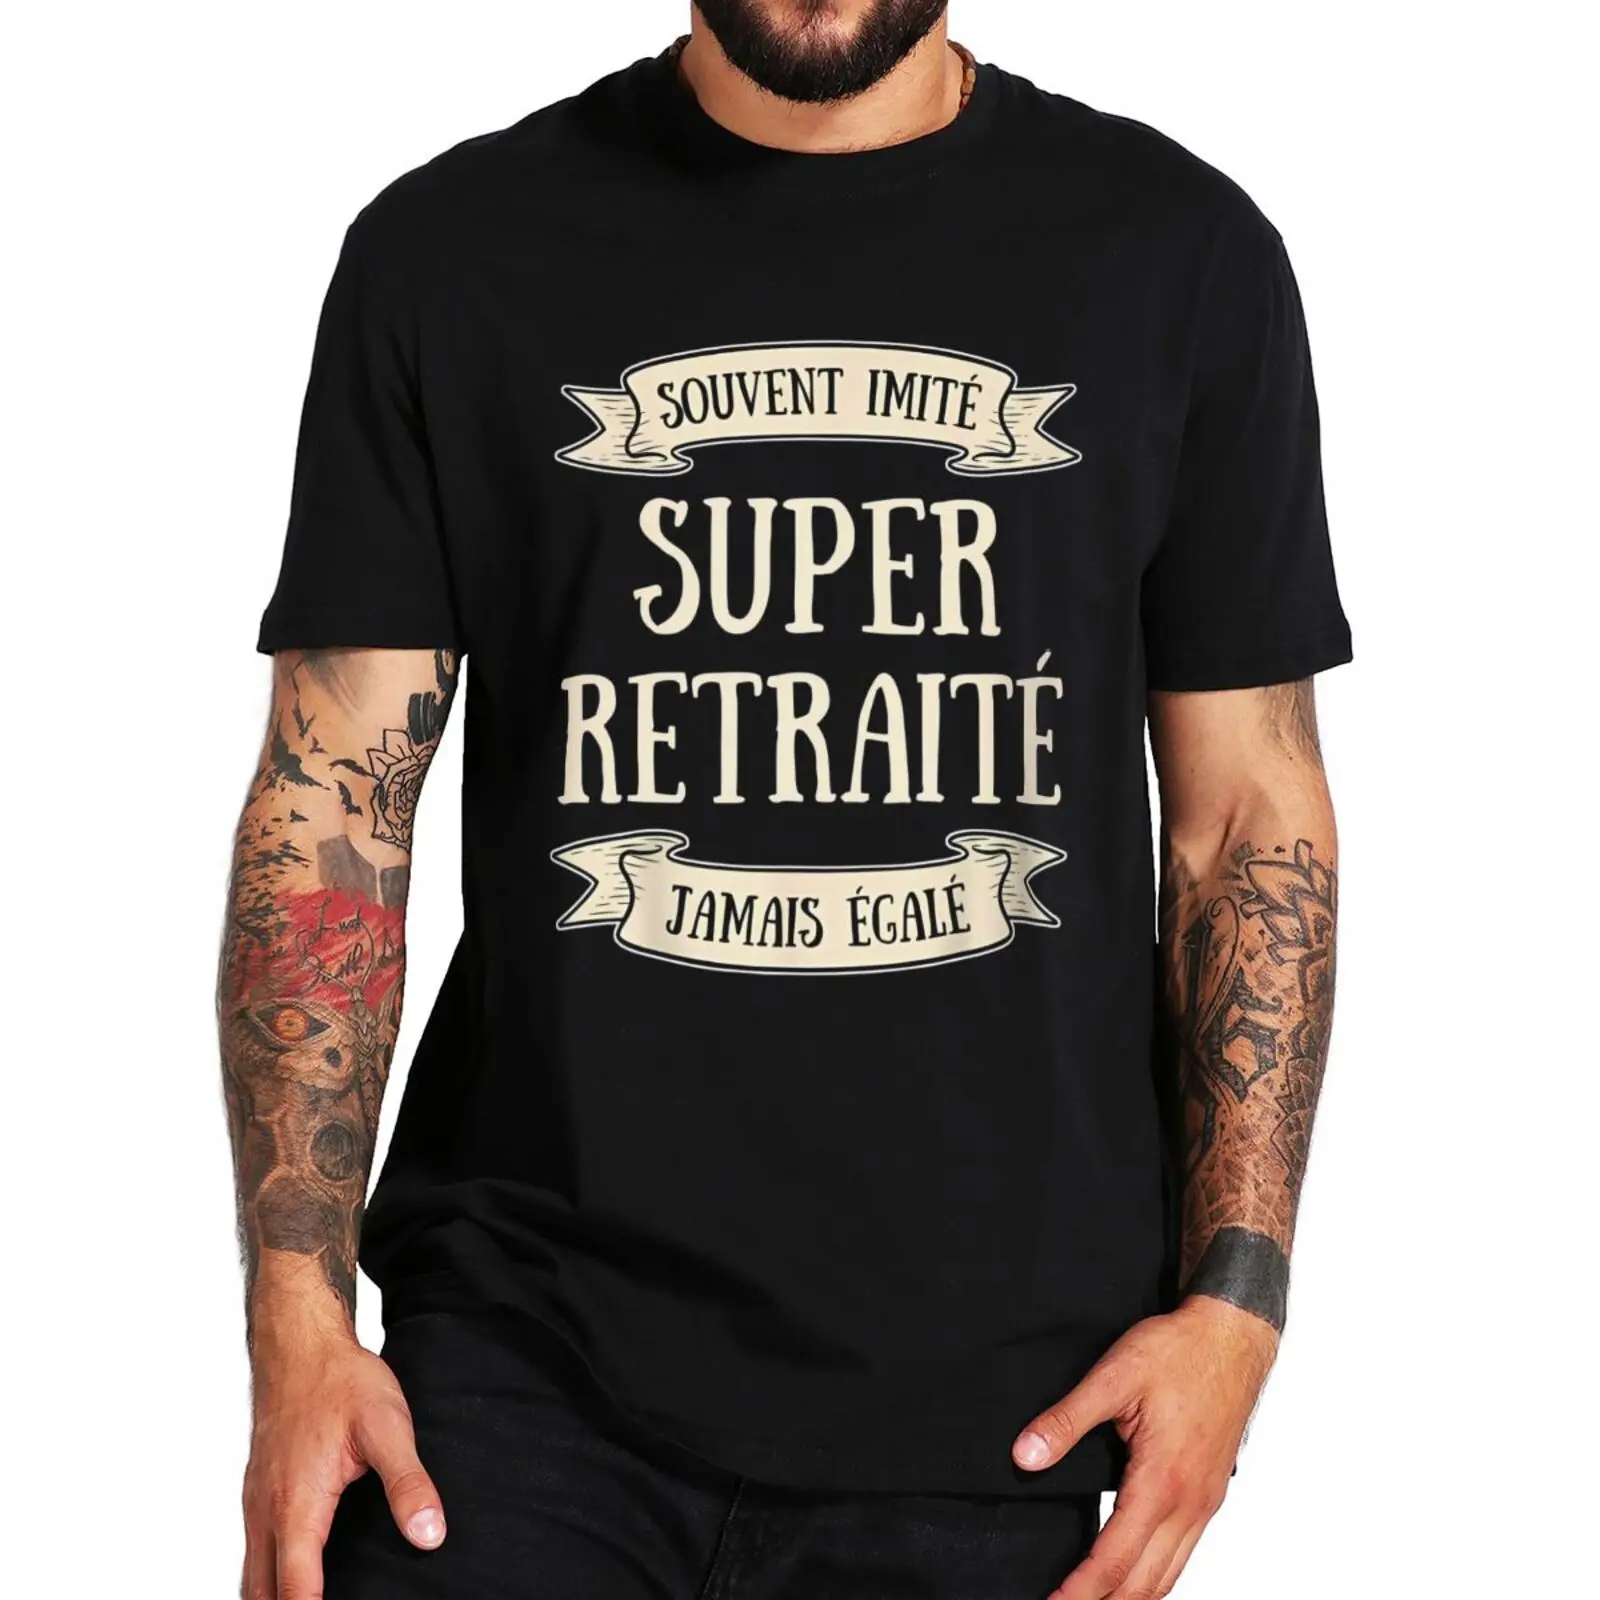 

Retired Man T Shirt Funny French Text Humor Retirement Dad Father Gift Tee Tops Casual 100% Cototn Unisex O-neck EU Size T-shirt